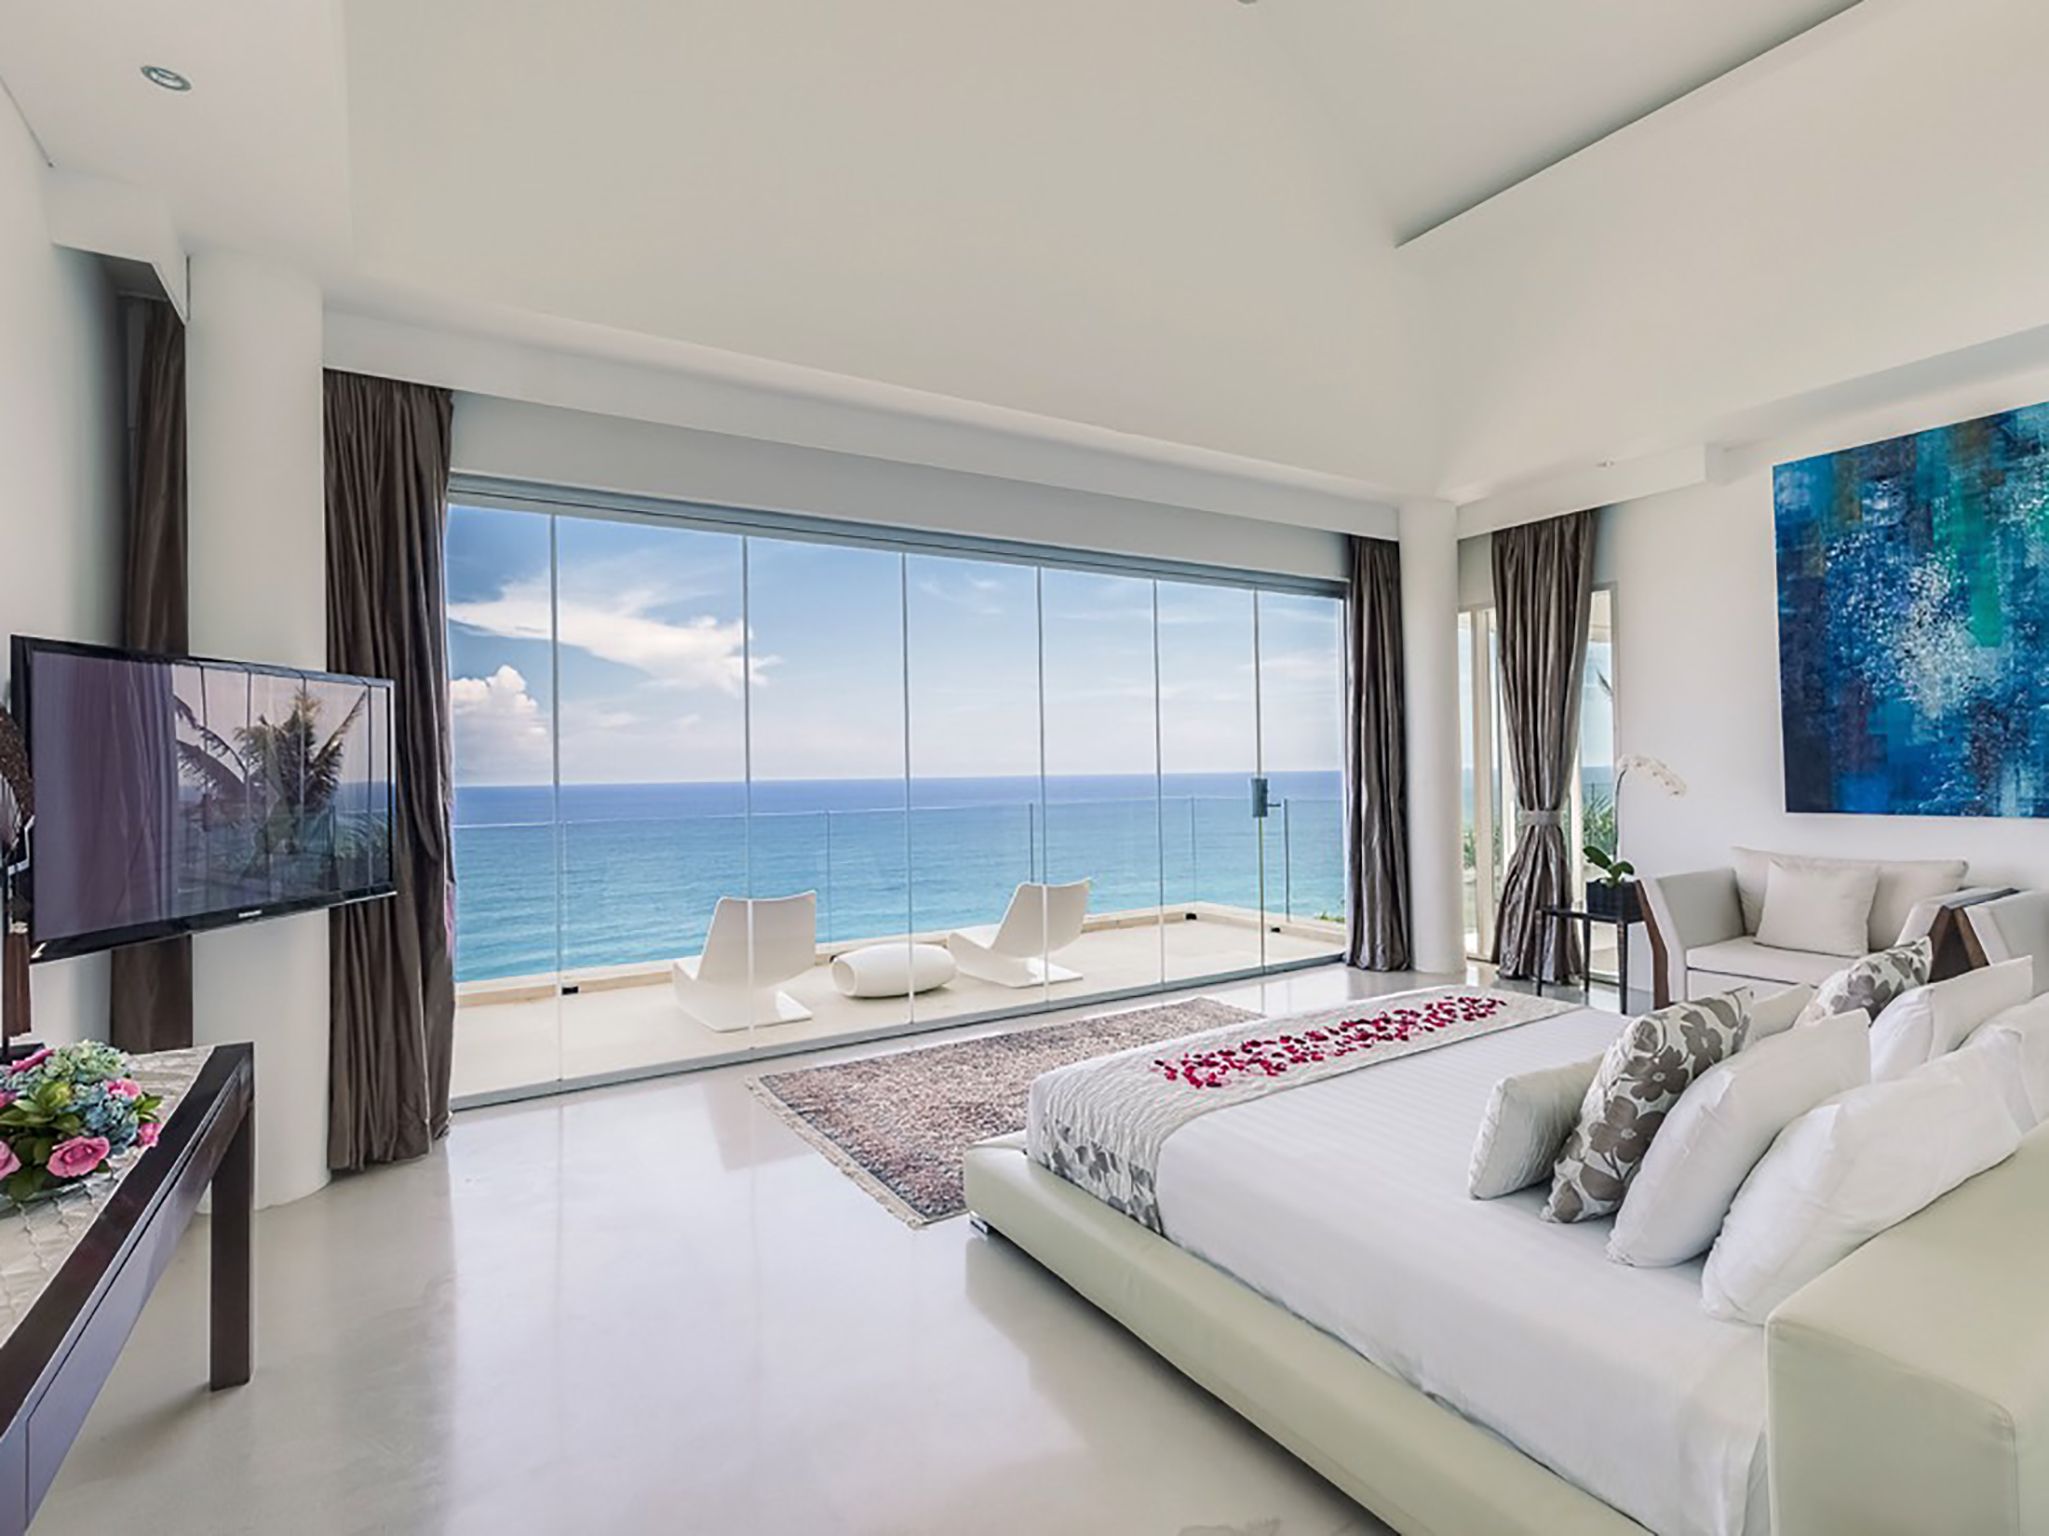 Grand Cliff Front Residence - Bedroom sea view TV